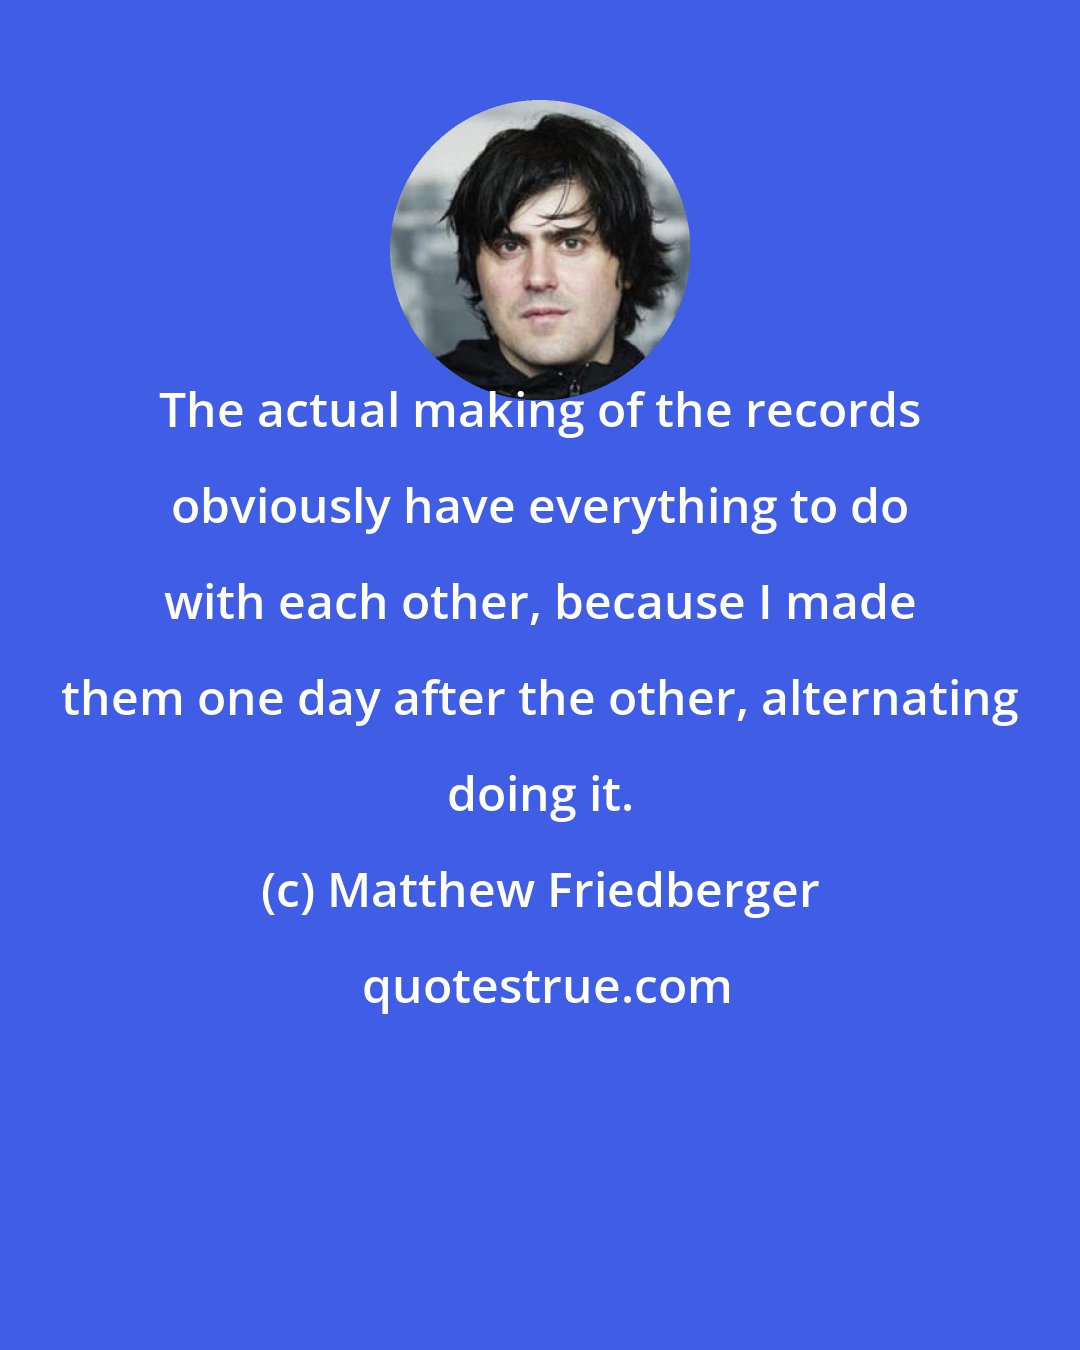 Matthew Friedberger: The actual making of the records obviously have everything to do with each other, because I made them one day after the other, alternating doing it.